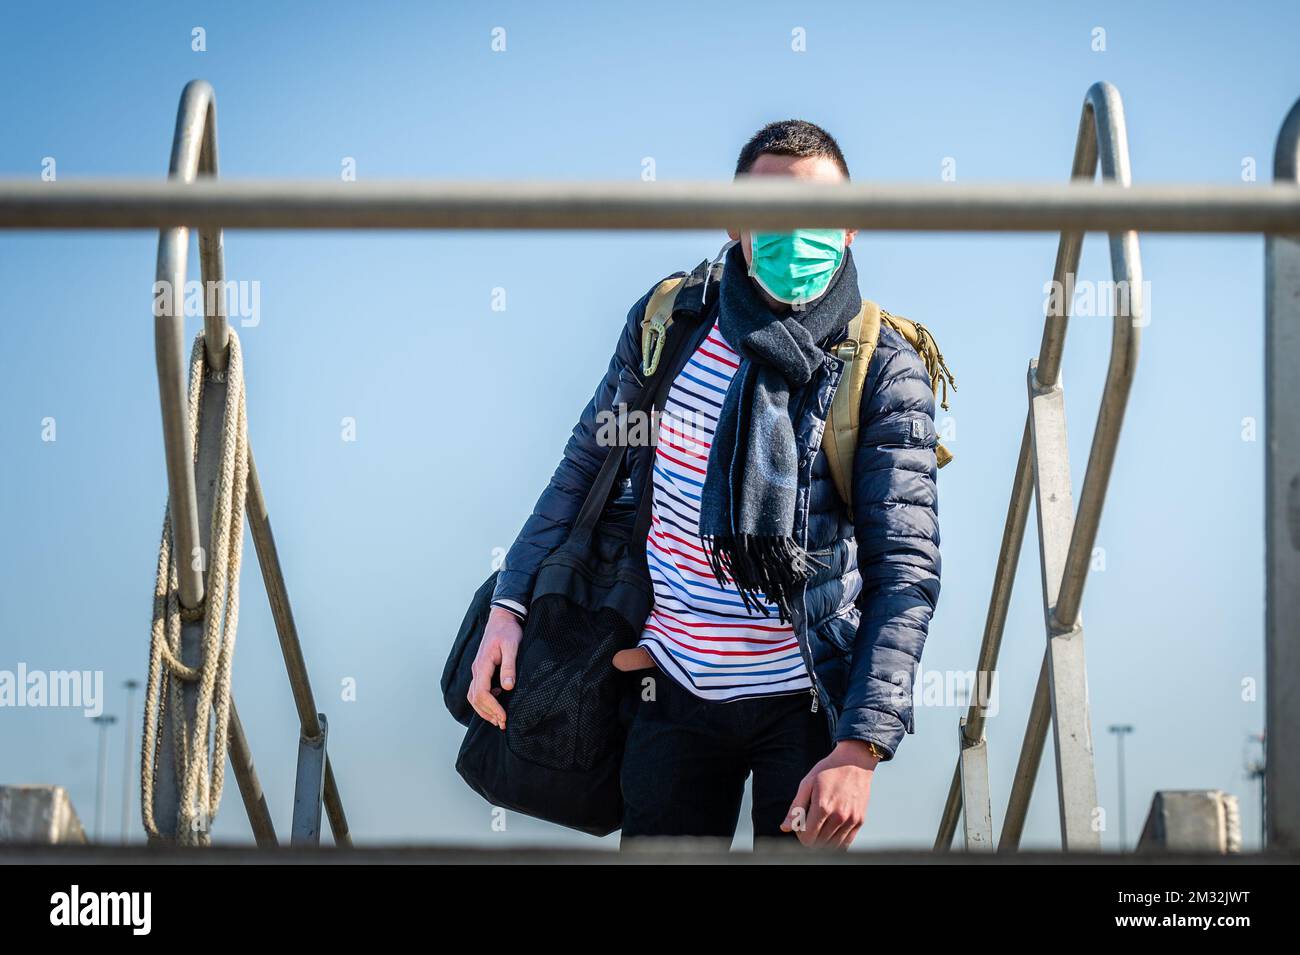 ATTENTION EDITORS - HAND OUT PICTURES - EDITORIAL USE ONLY - MANDATORY CREDIT HANDOUT DEFENSIE - DEFENCE TBN JORN URBAIN A person wearing a mouth mask pictured at the arrival of Belgian frigate Leopold 1 in Zeebrugge, Friday 27 March 2020. One of the sailors on the frigate has a confirmed Corona virus infection and has left the ship earlier. Due to the strict measures following such an infection, the ship has returned earlier from its mission and all non-infected sailors must now stay in home quarantine. BELGA PHOTO HANDOUT DEFENSIE - DEFENCE TBN JORN URBAIN  Stock Photo